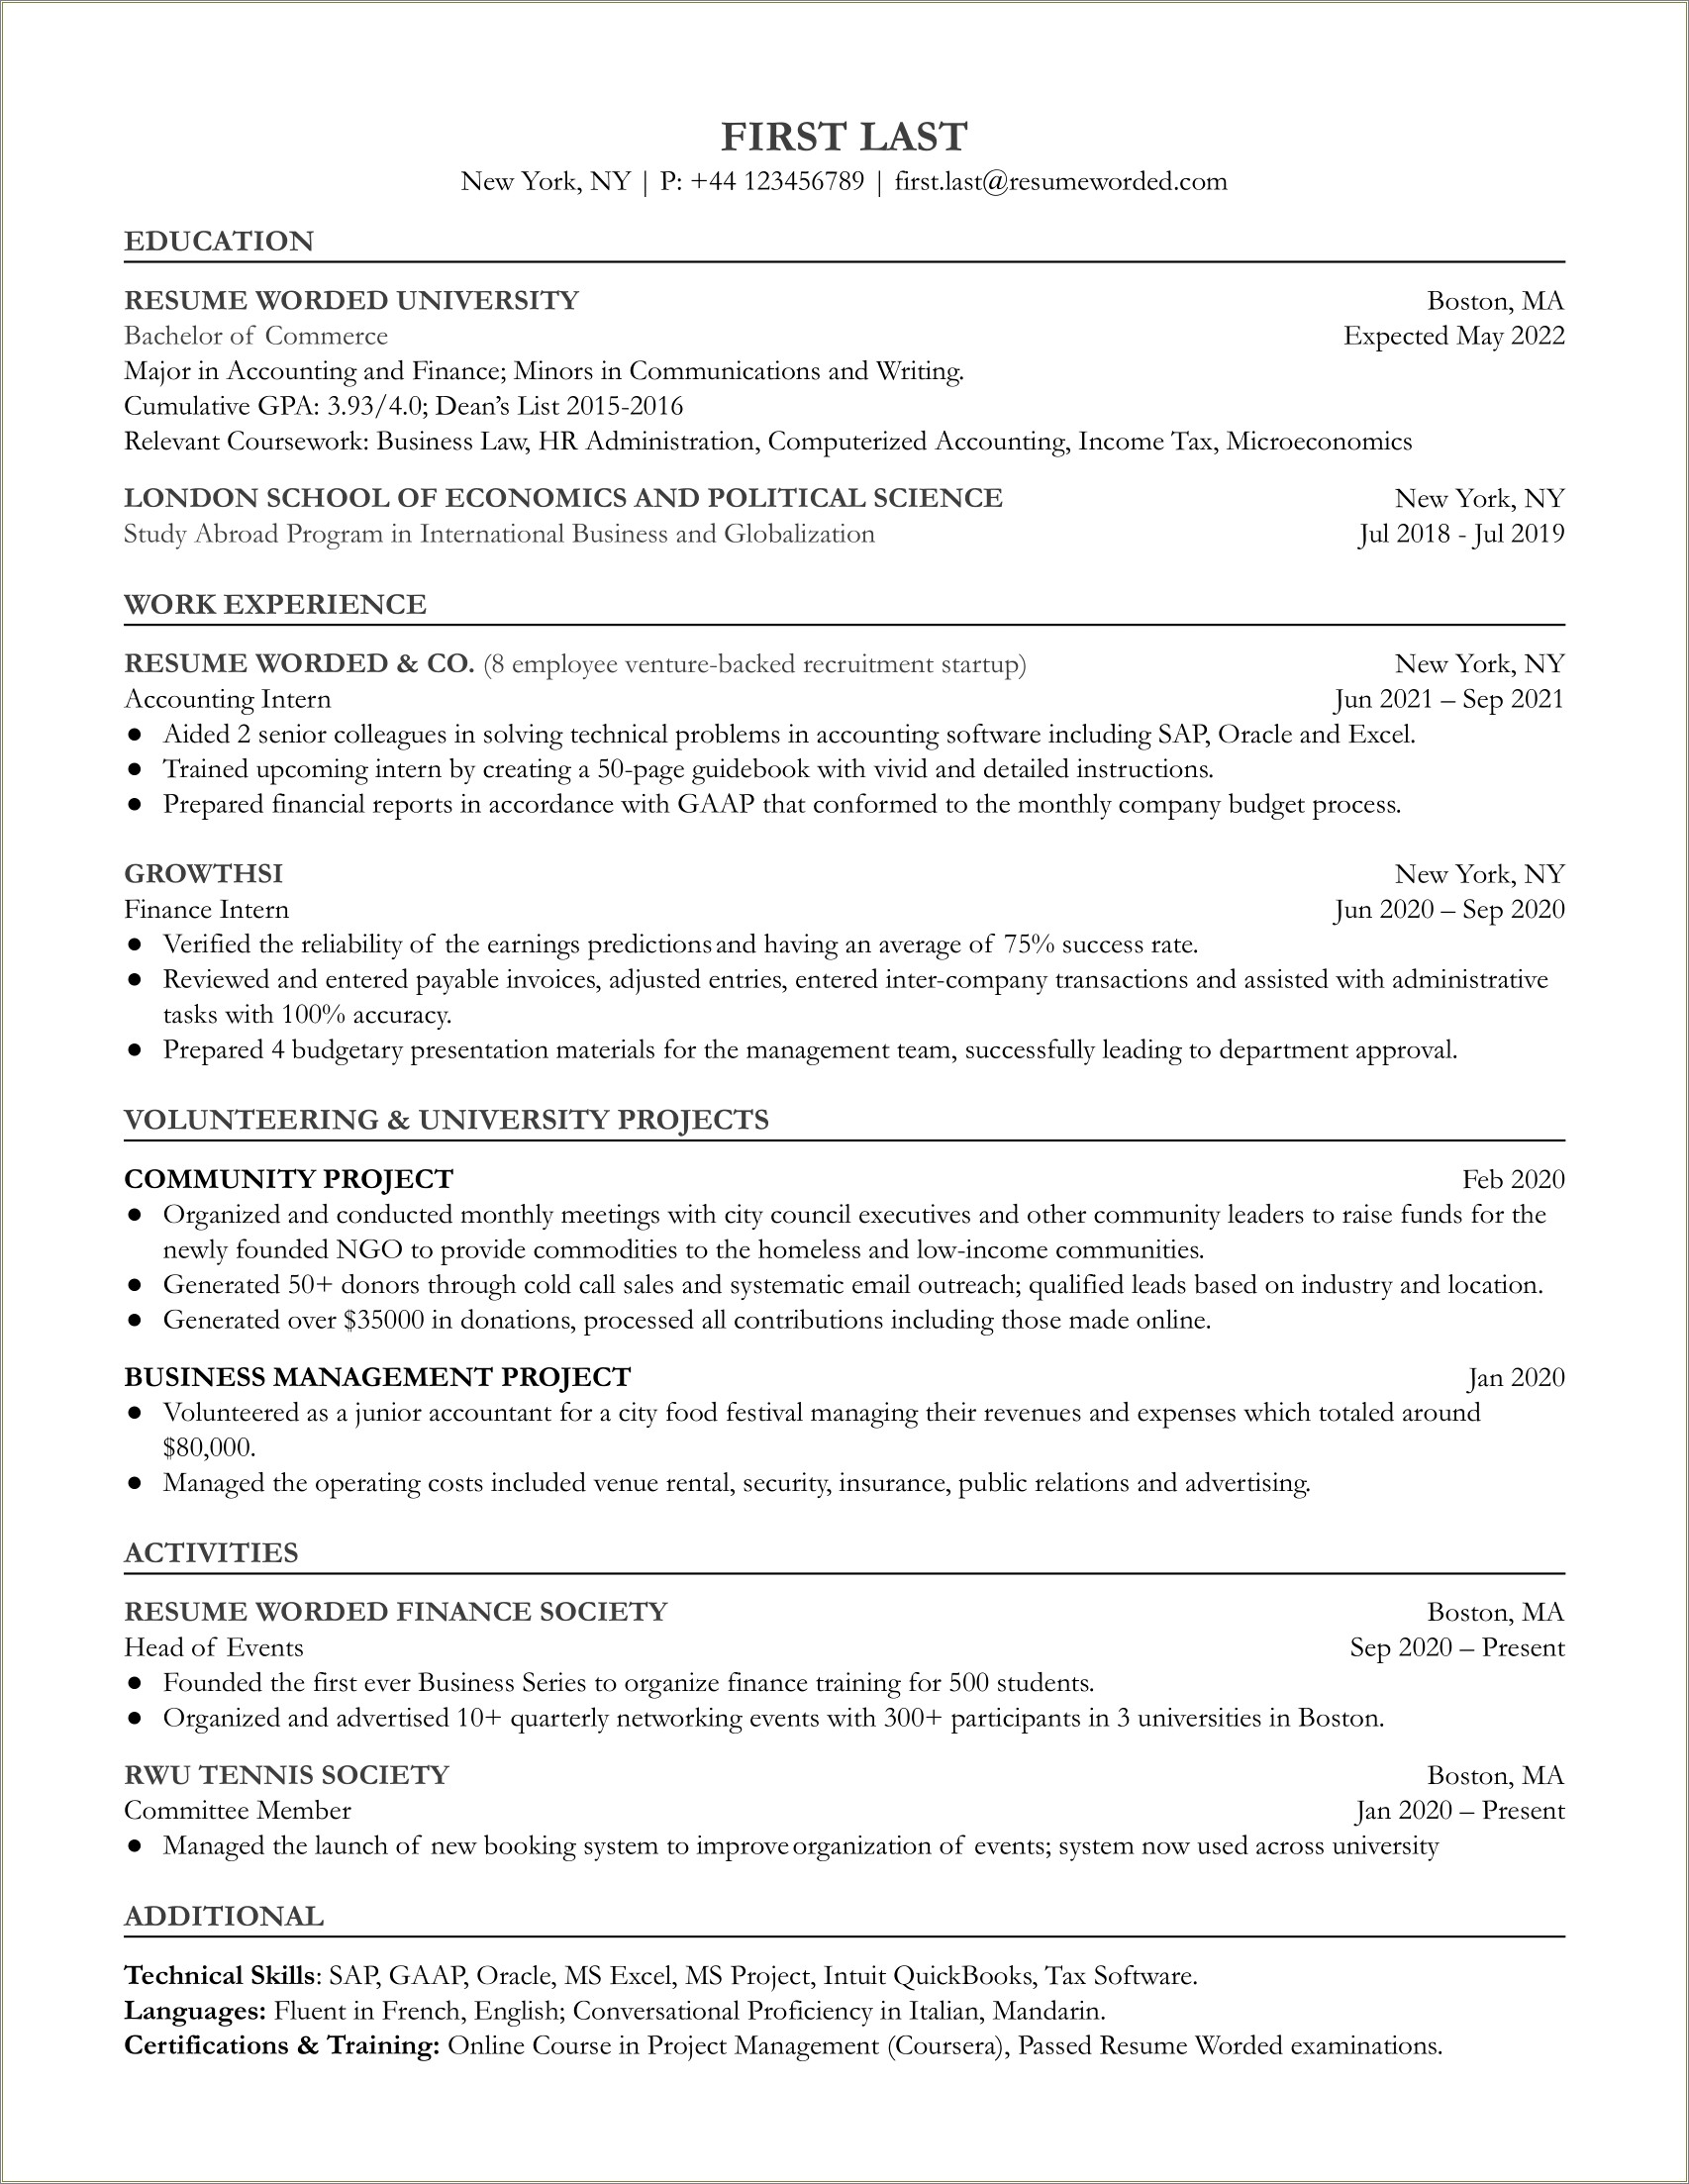 Resume Objectives For Entry Level Accounting Positions